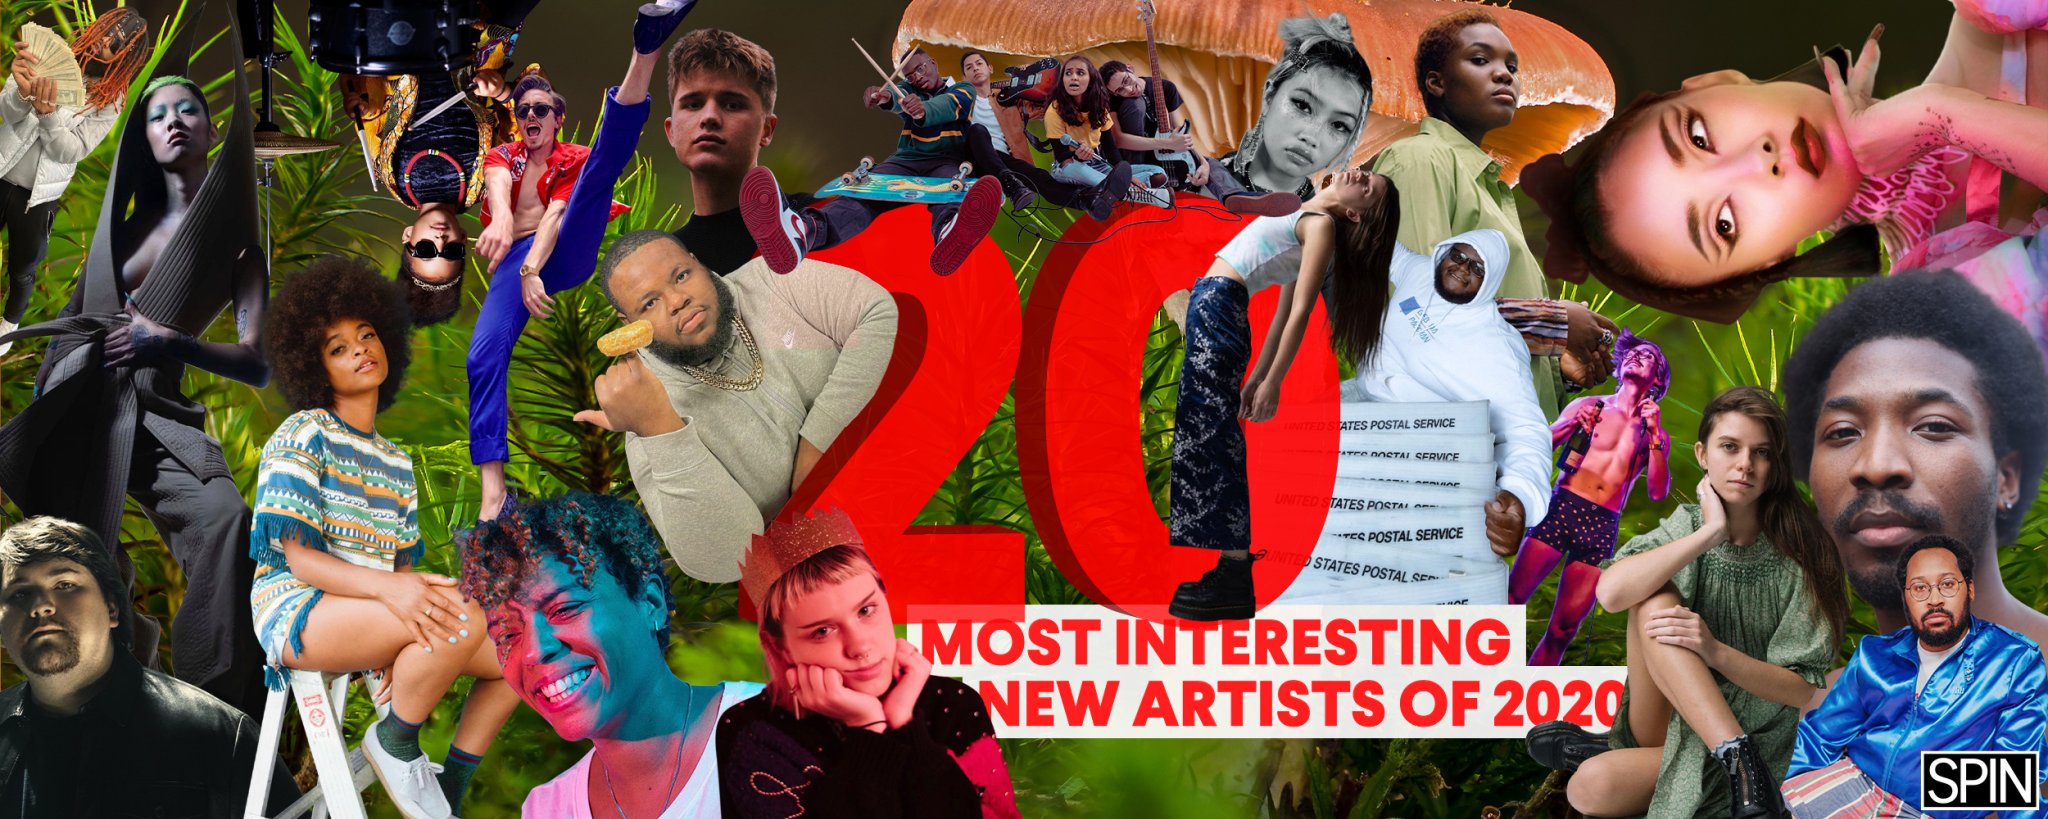 The 20 Most Interesting New Artists of 2020